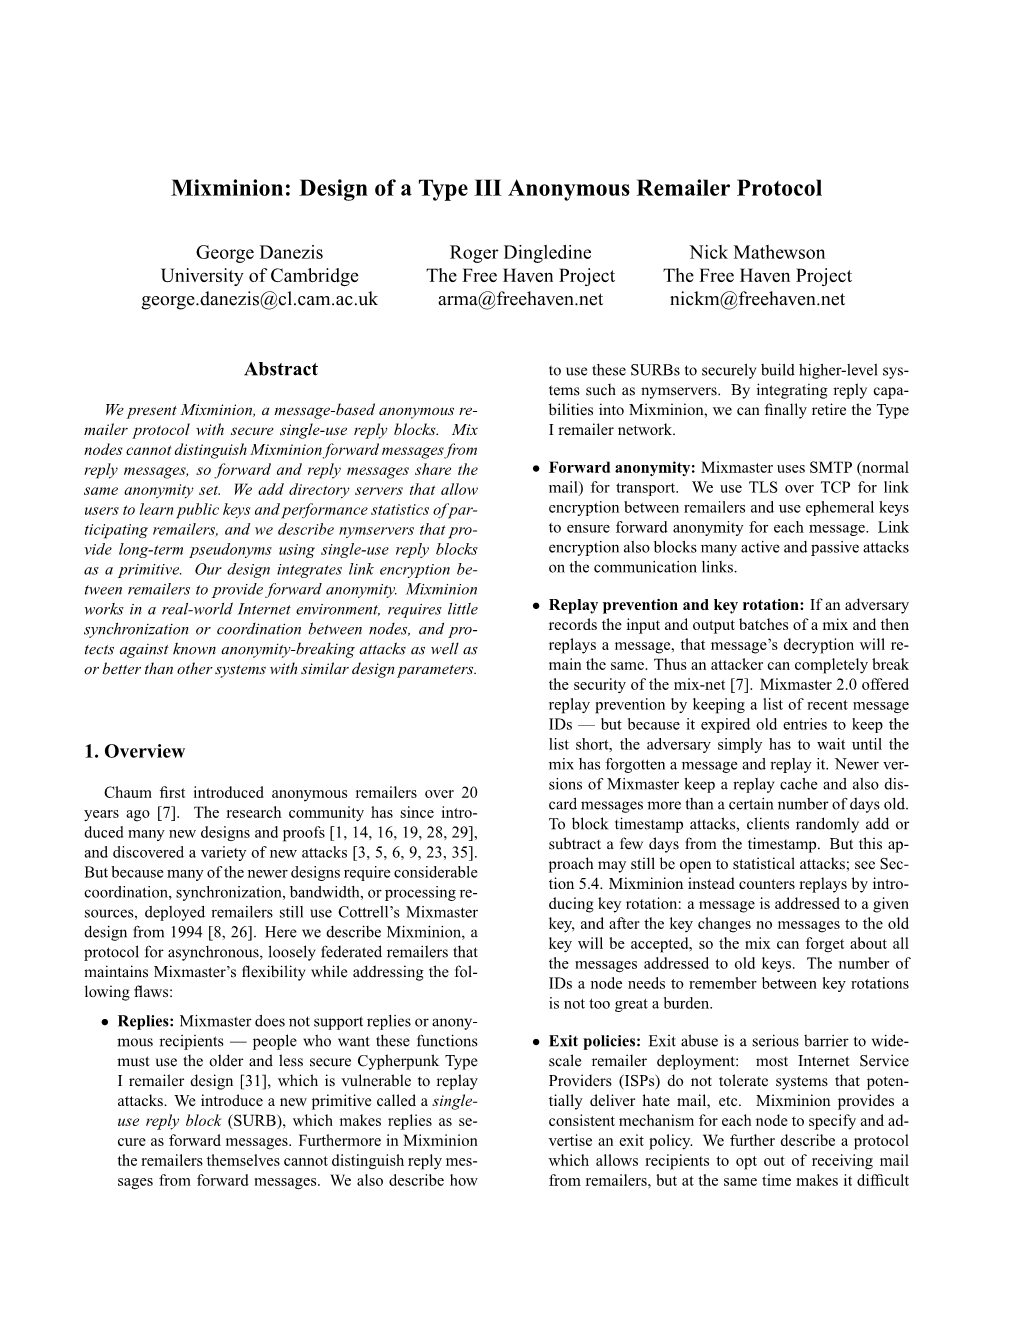 Design of a Type III Anonymous Remailer Protocol